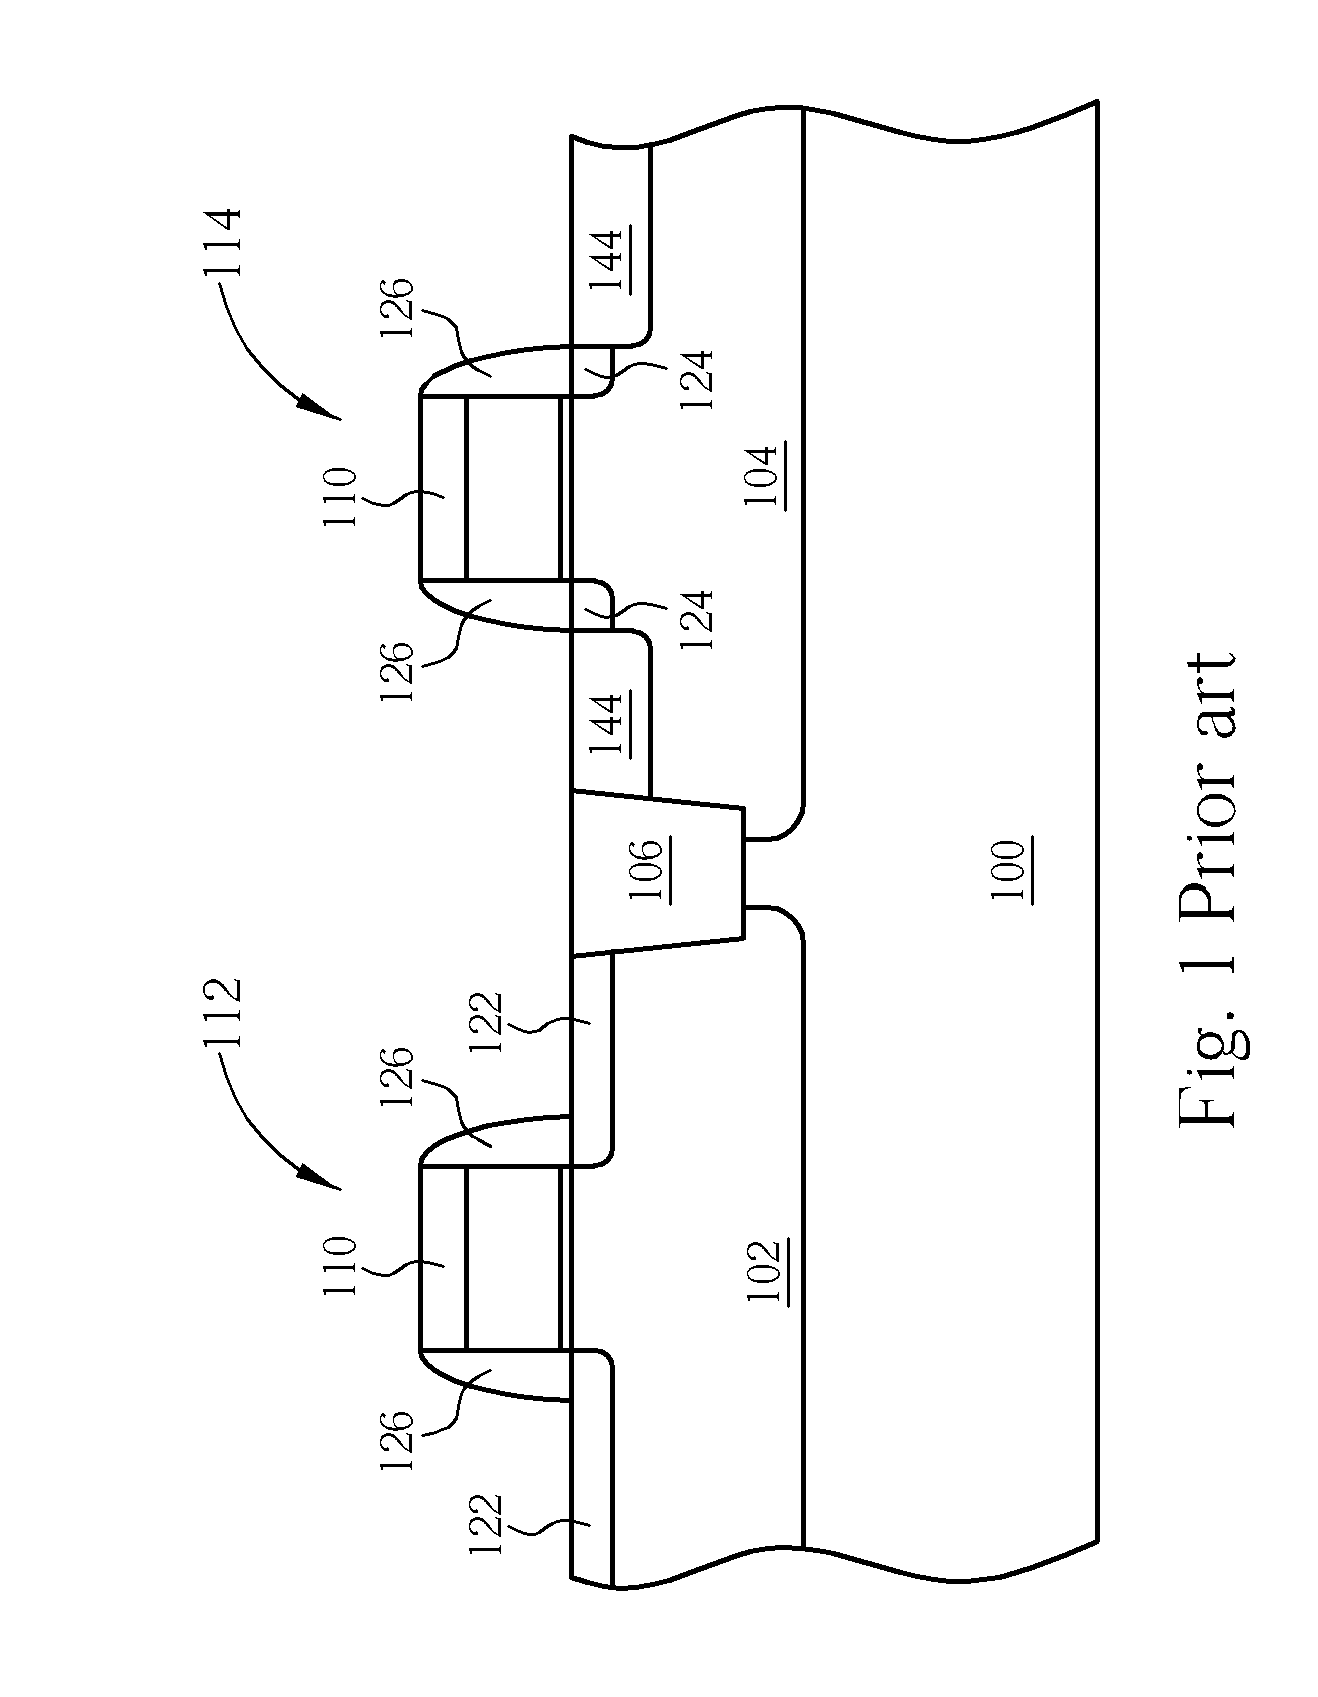 Method of manufacturing complementary metal oxide semiconductor transistors